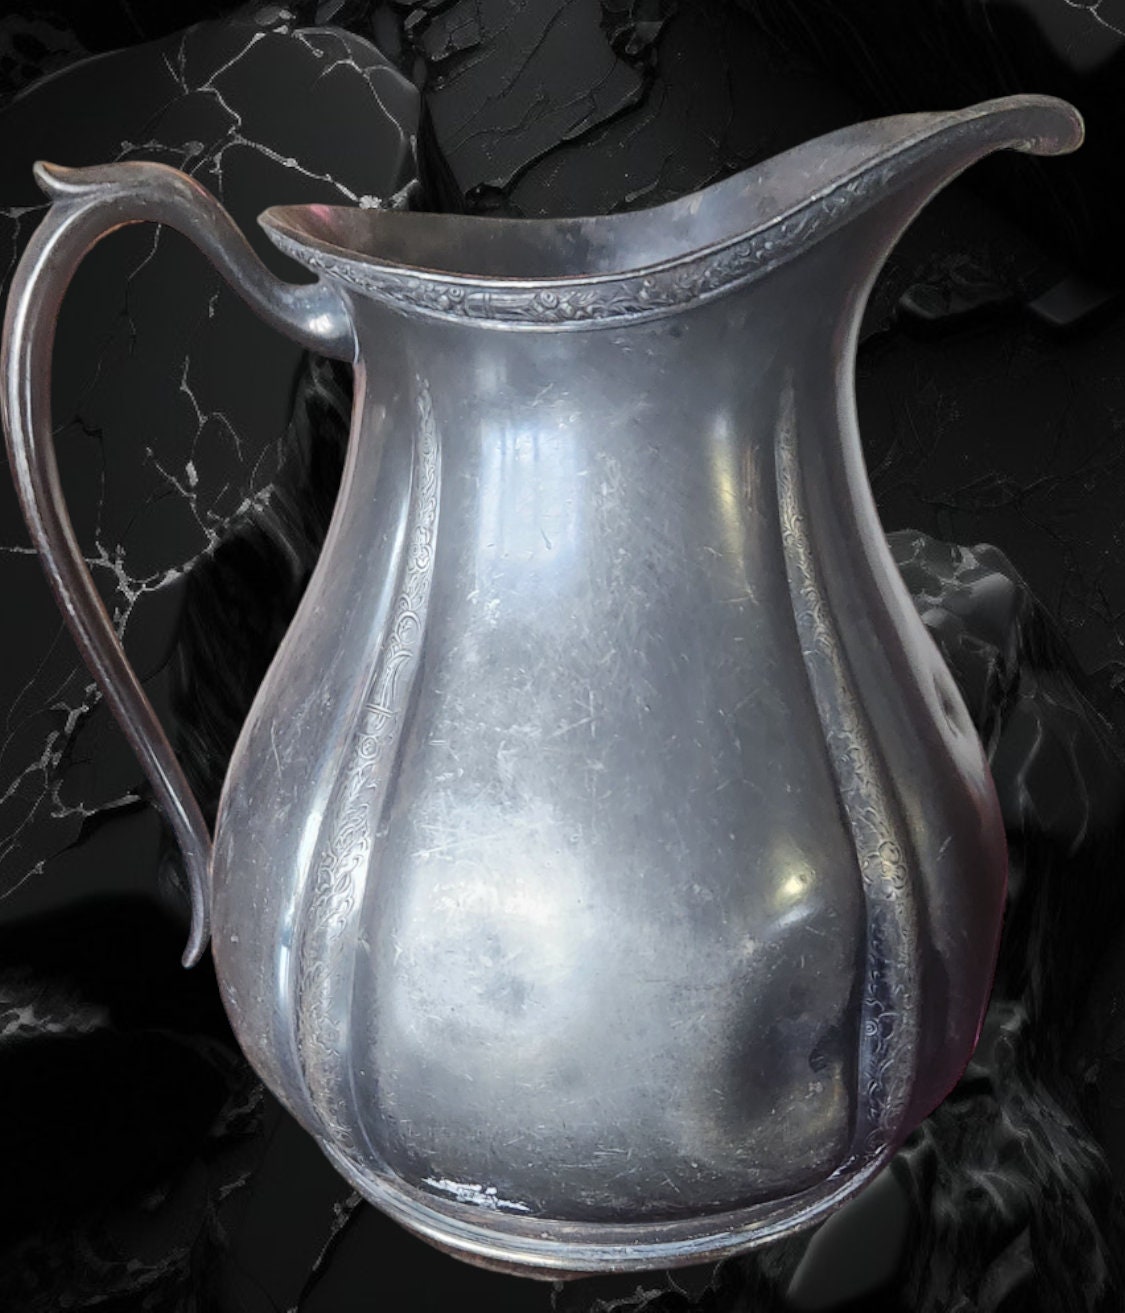 Charming Silver-Plated Potbelly Beverage Pitcher